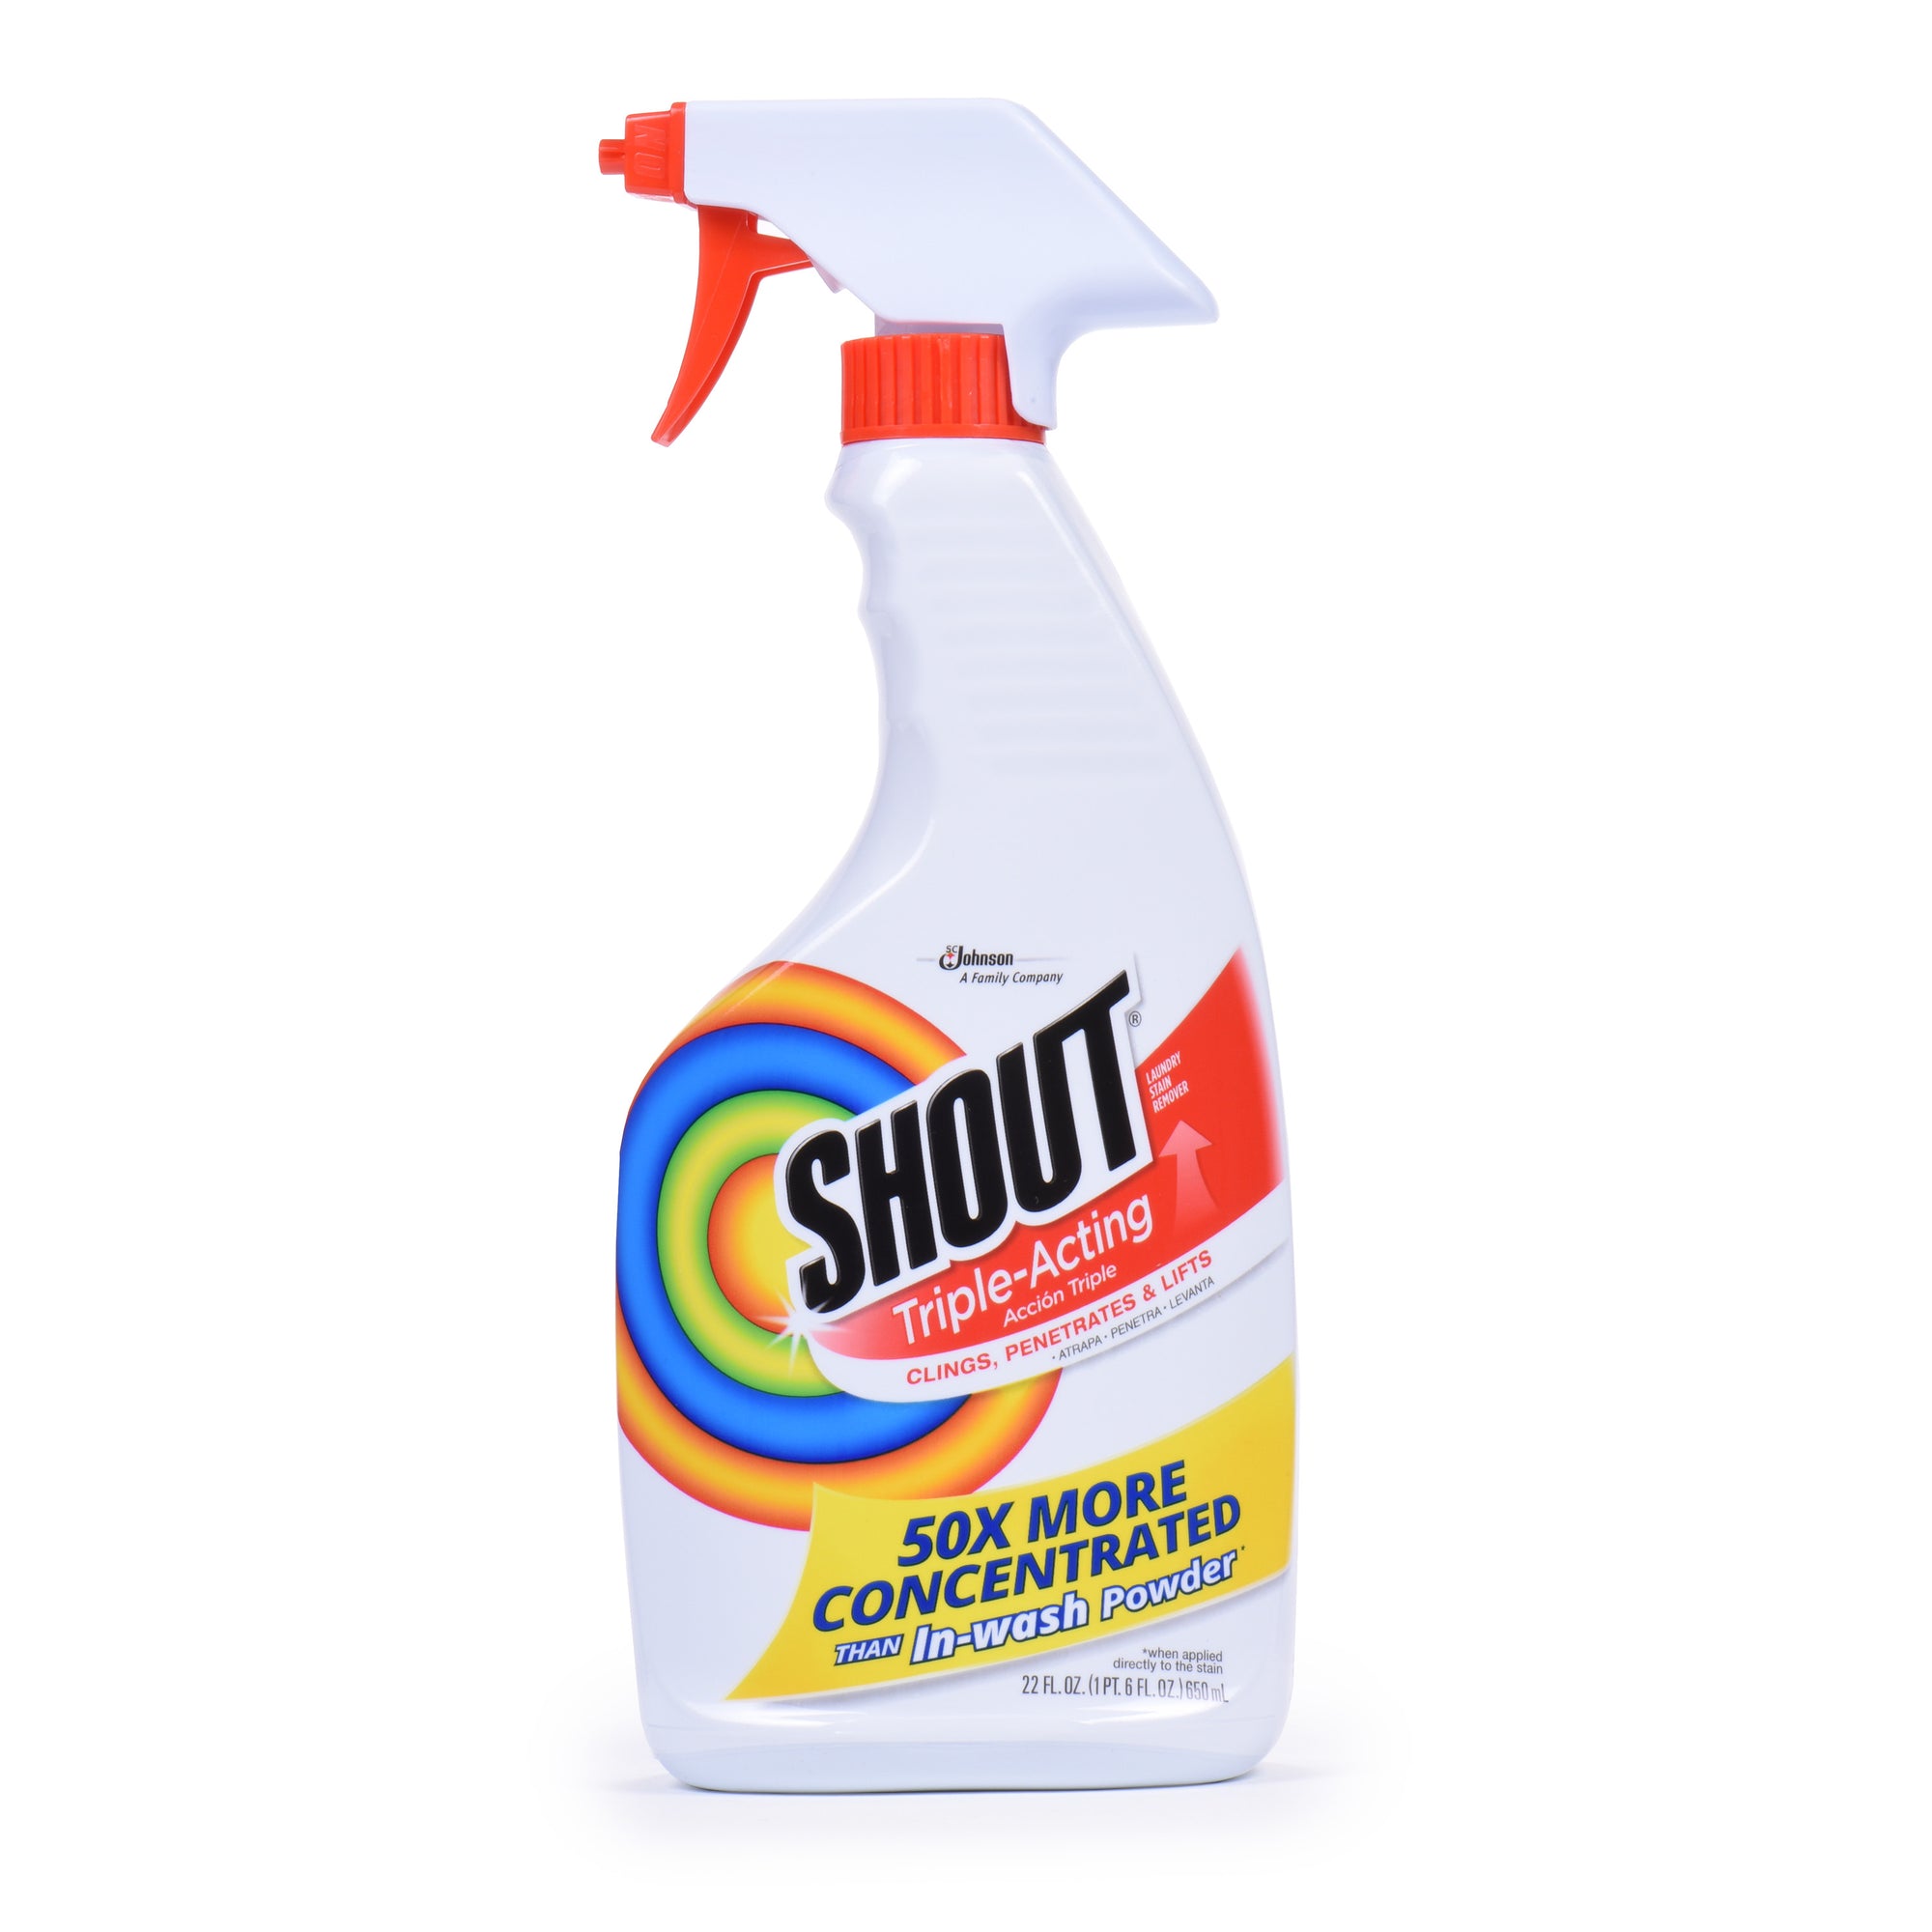 Shout Triple-Acting Stain Remover Spray, 22 Fl Oz